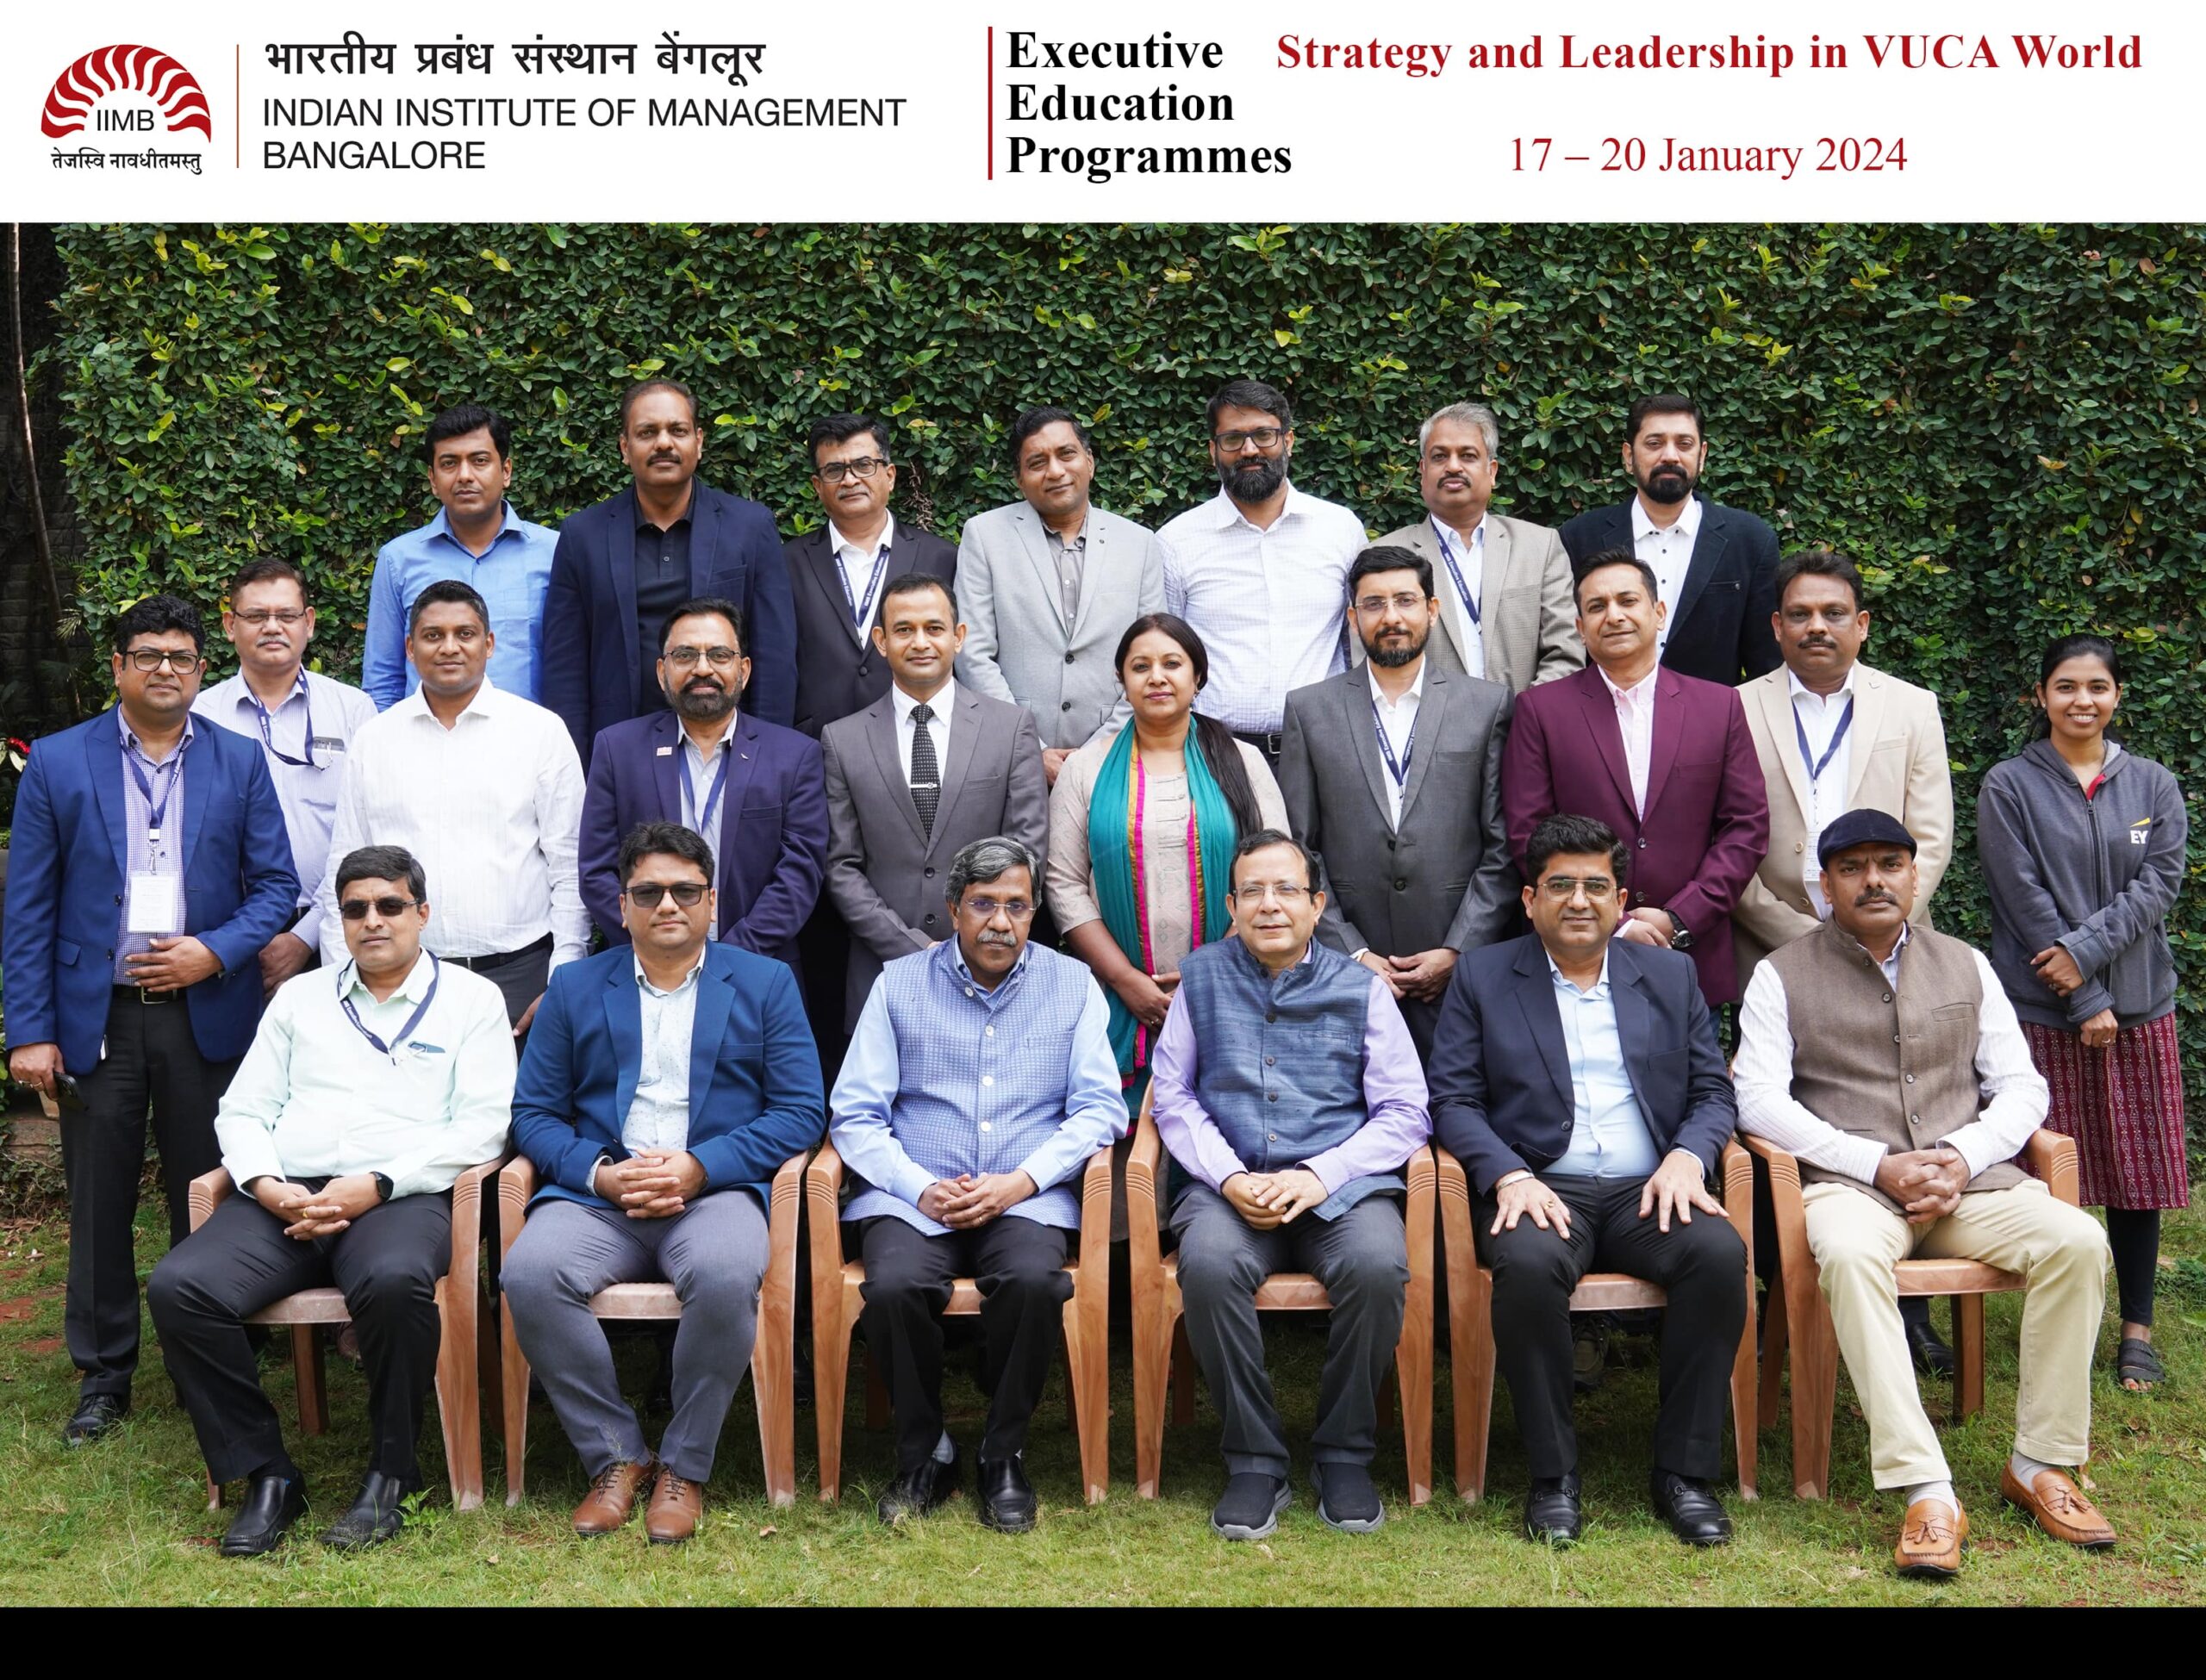 Group photo of participants of VUCA world programme